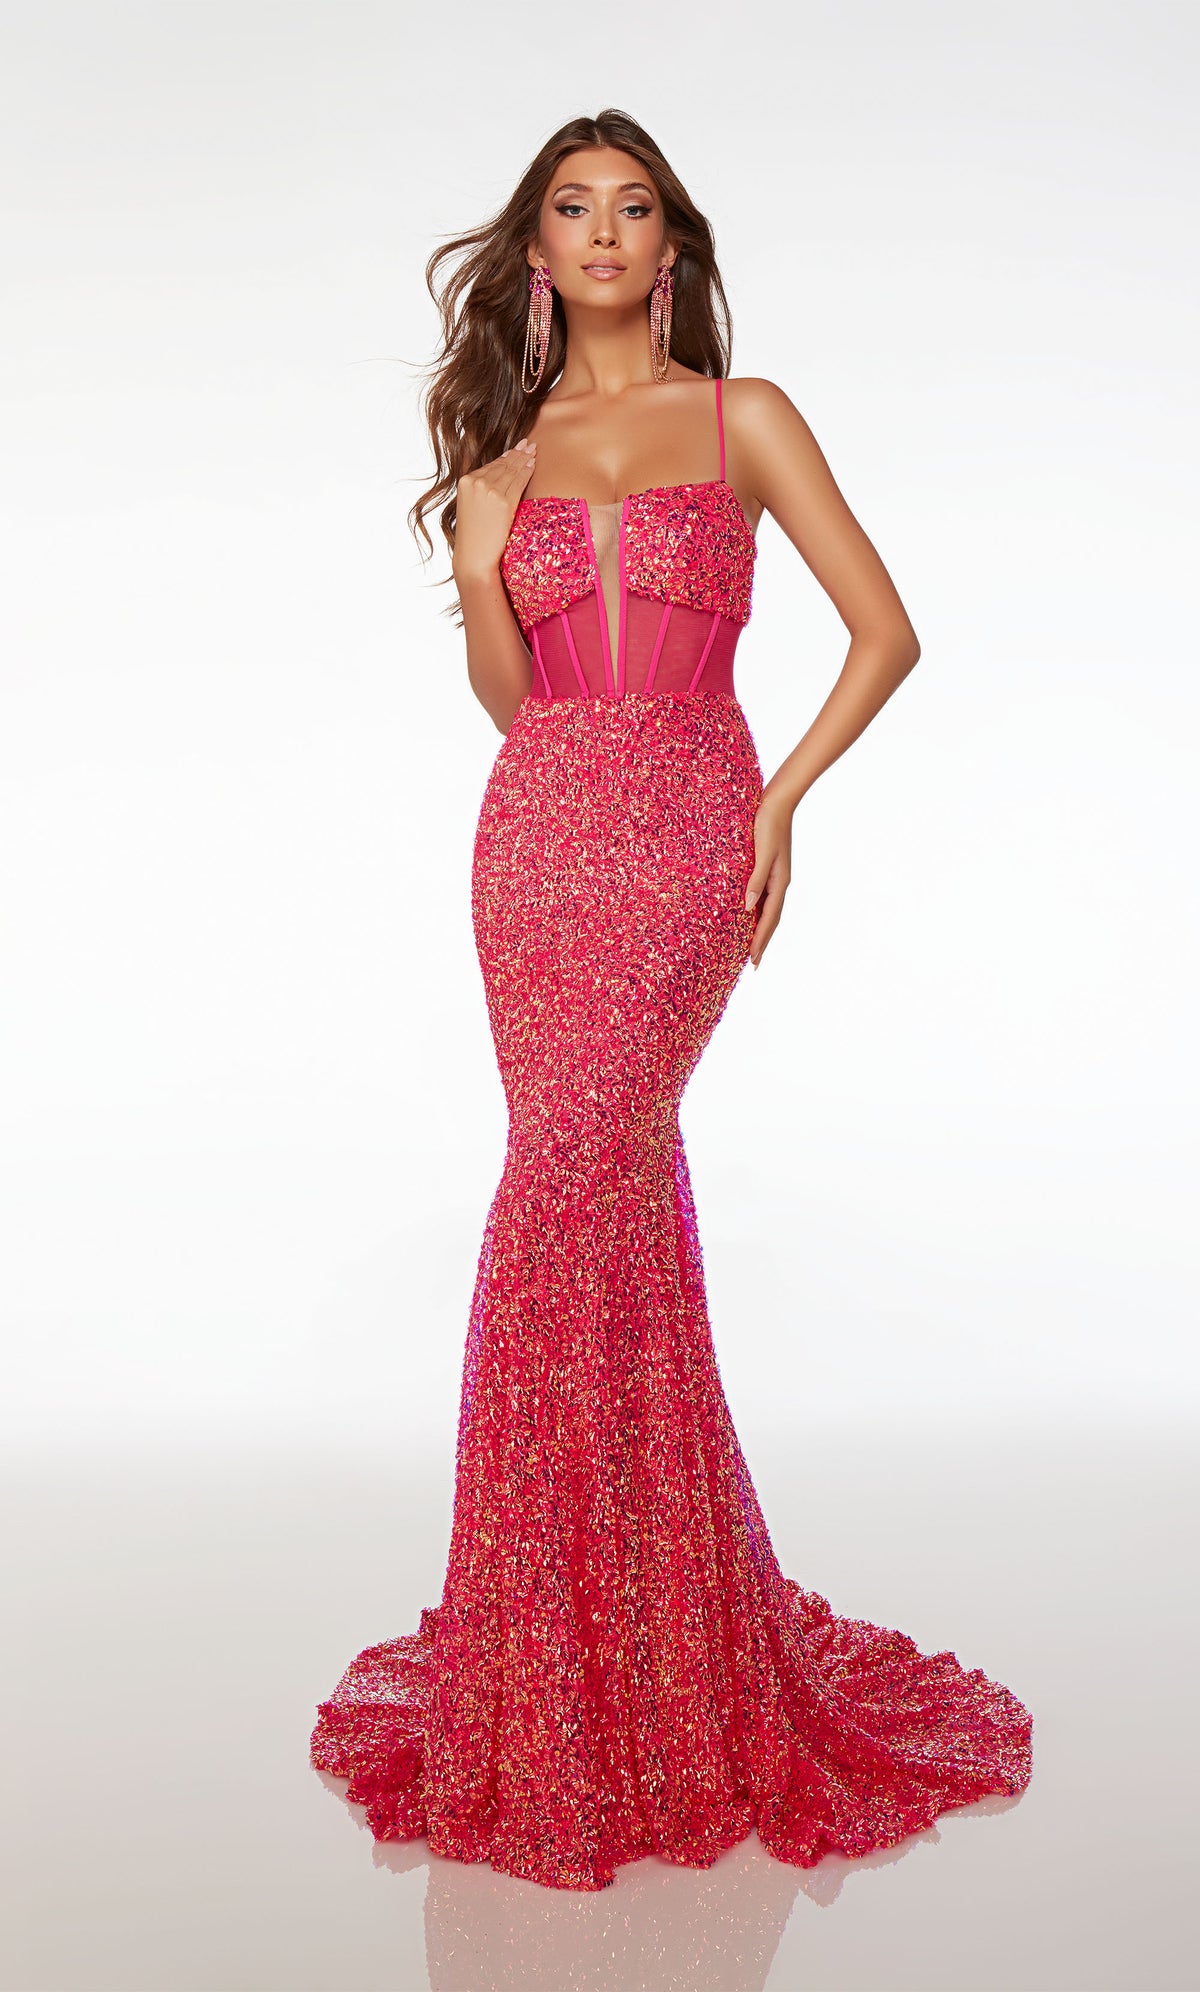 Dazzling pink sequin mermaid dress with an square plunging neckline, sheer corset top, crisscross lace-up back, and an gracefully long train.